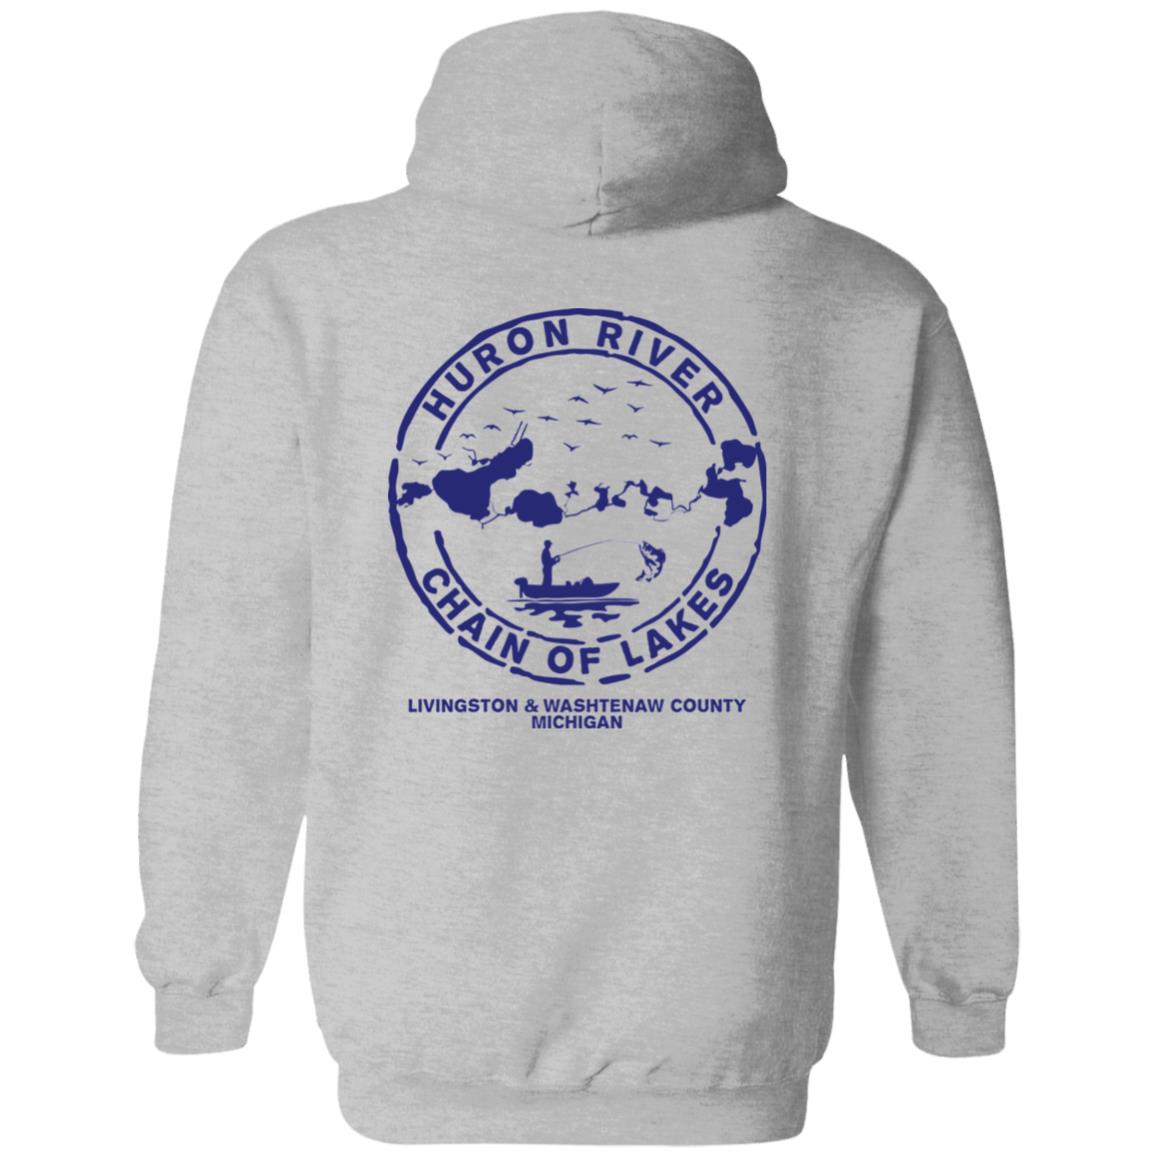 HRCL FL - Navy Beer Bourbon Bikinis Boats - 2 Sided G185 Pullover Hoodie